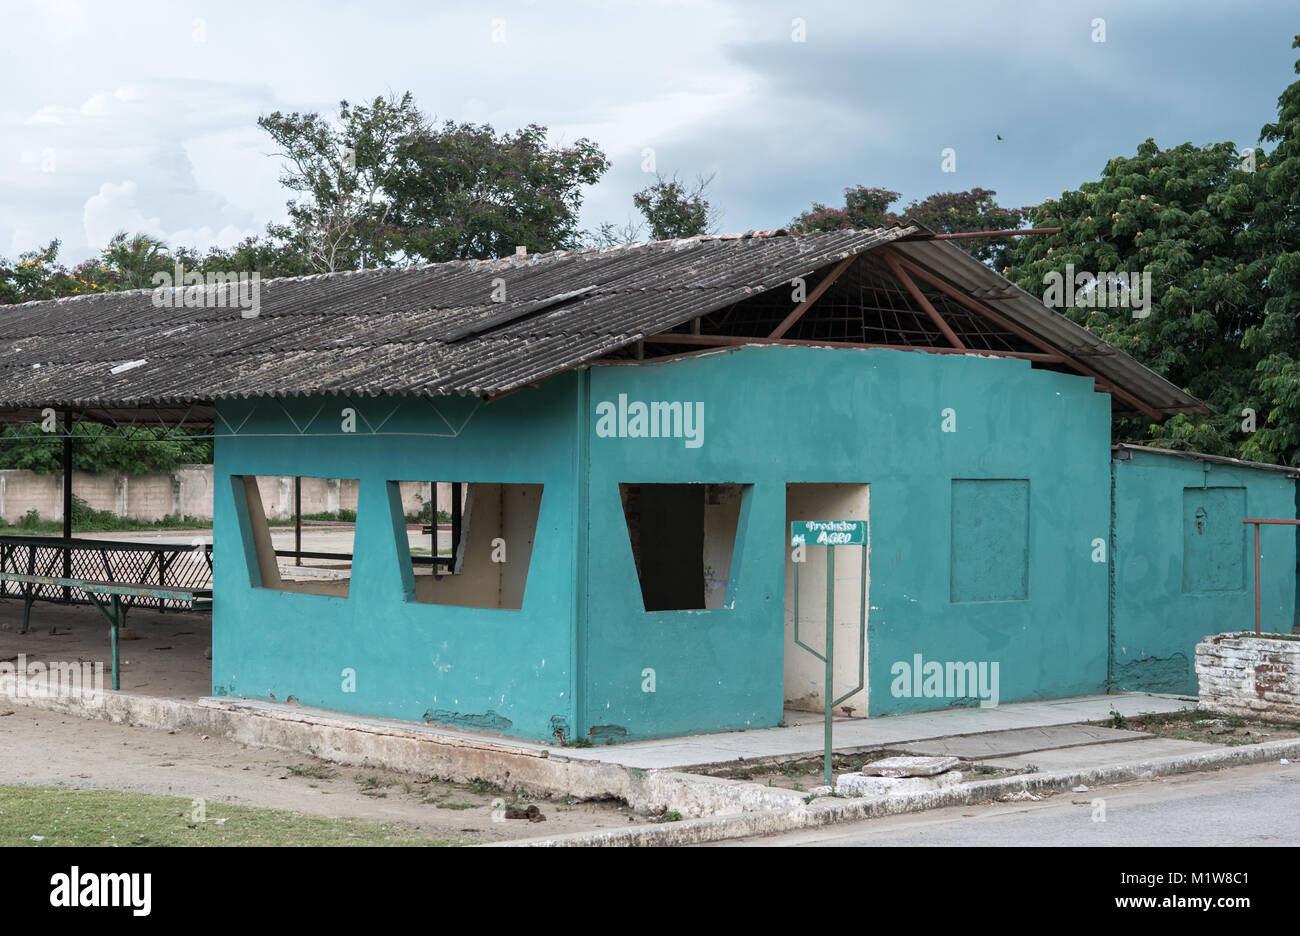 Las Tunas, Cuba - September 4, 2017: Agriculture market building in the fairgrounds. Stock Photo